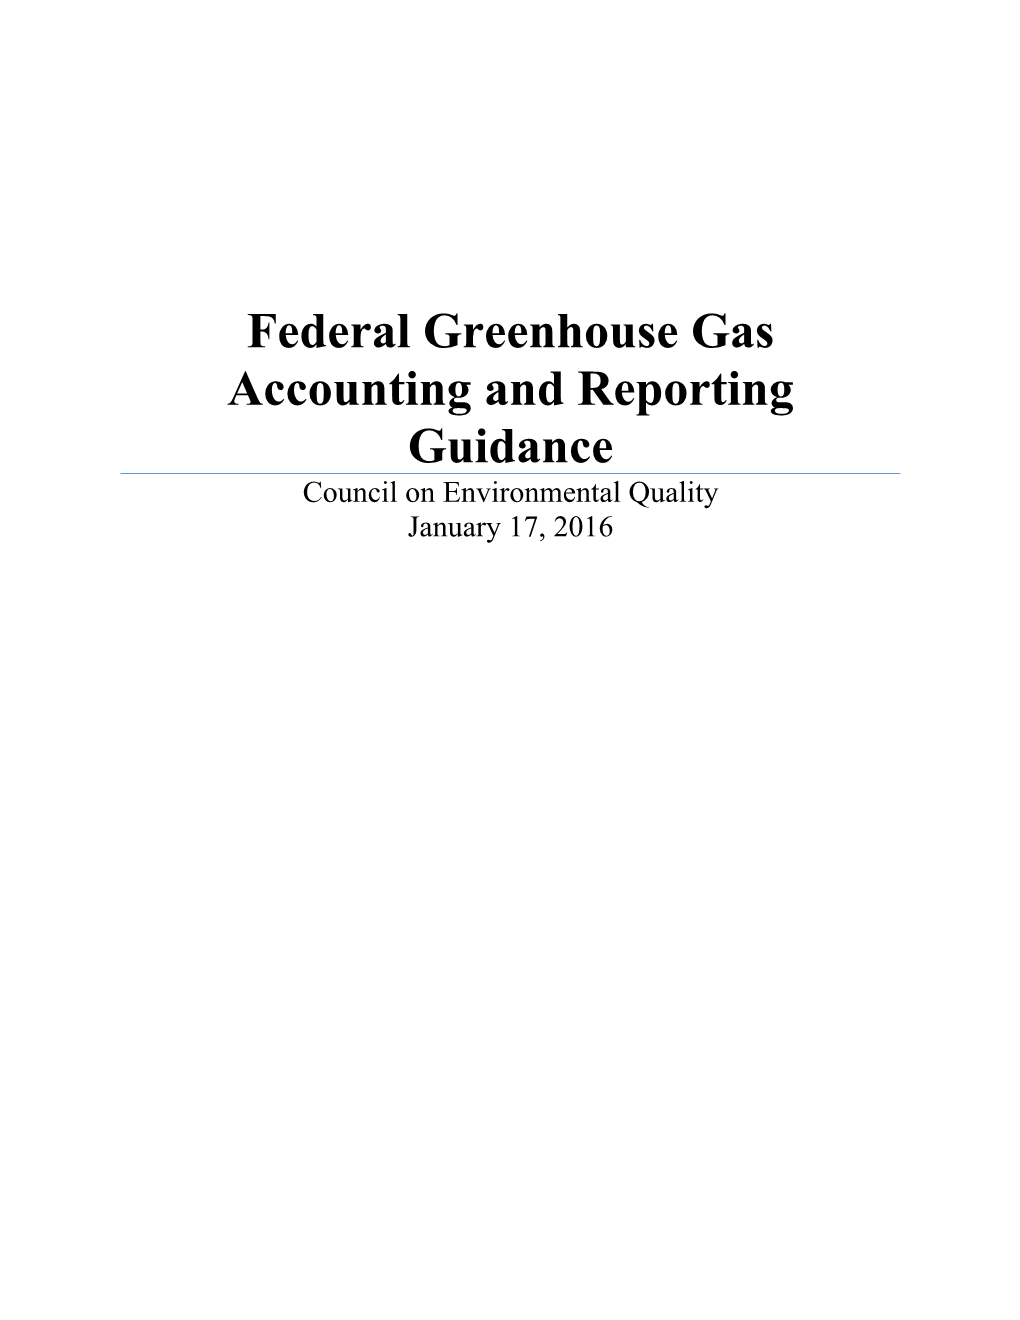 Federal Greenhouse Gas Accounting and Reporting Guidance Council on Environmental Quality January 17, 2016